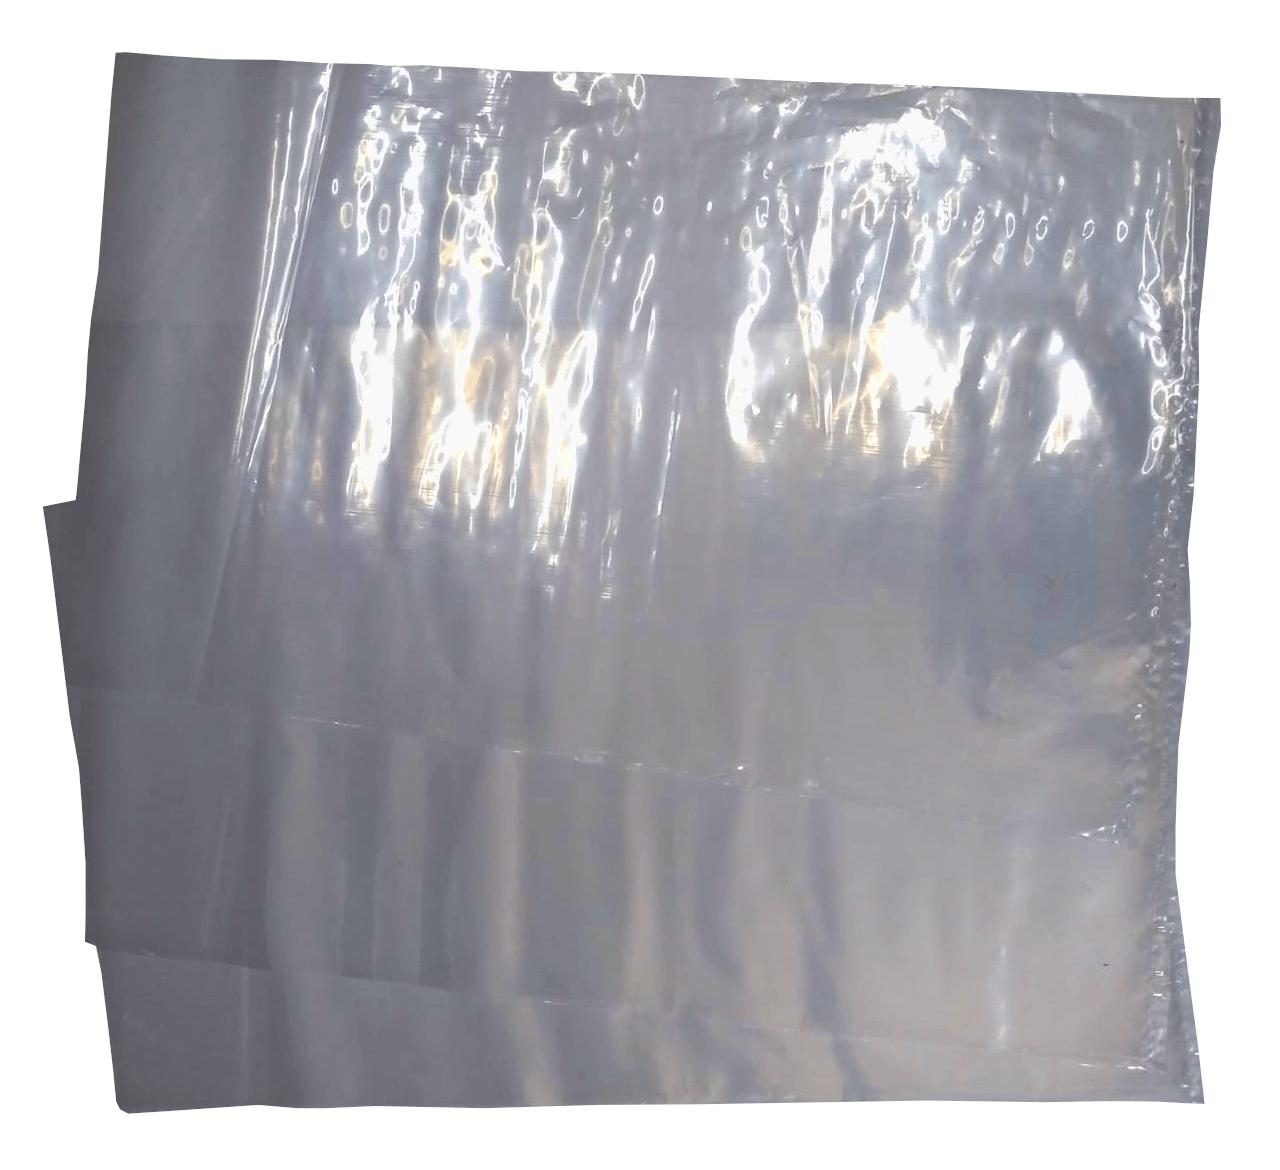 Self Sealing Clear Plastic Poly Bags | Suffocation Warning Bags | Safety of  your items with our bubble wrap envelopes and durable polyethylene mailers  | A seamless & eye-catching packaging experience |